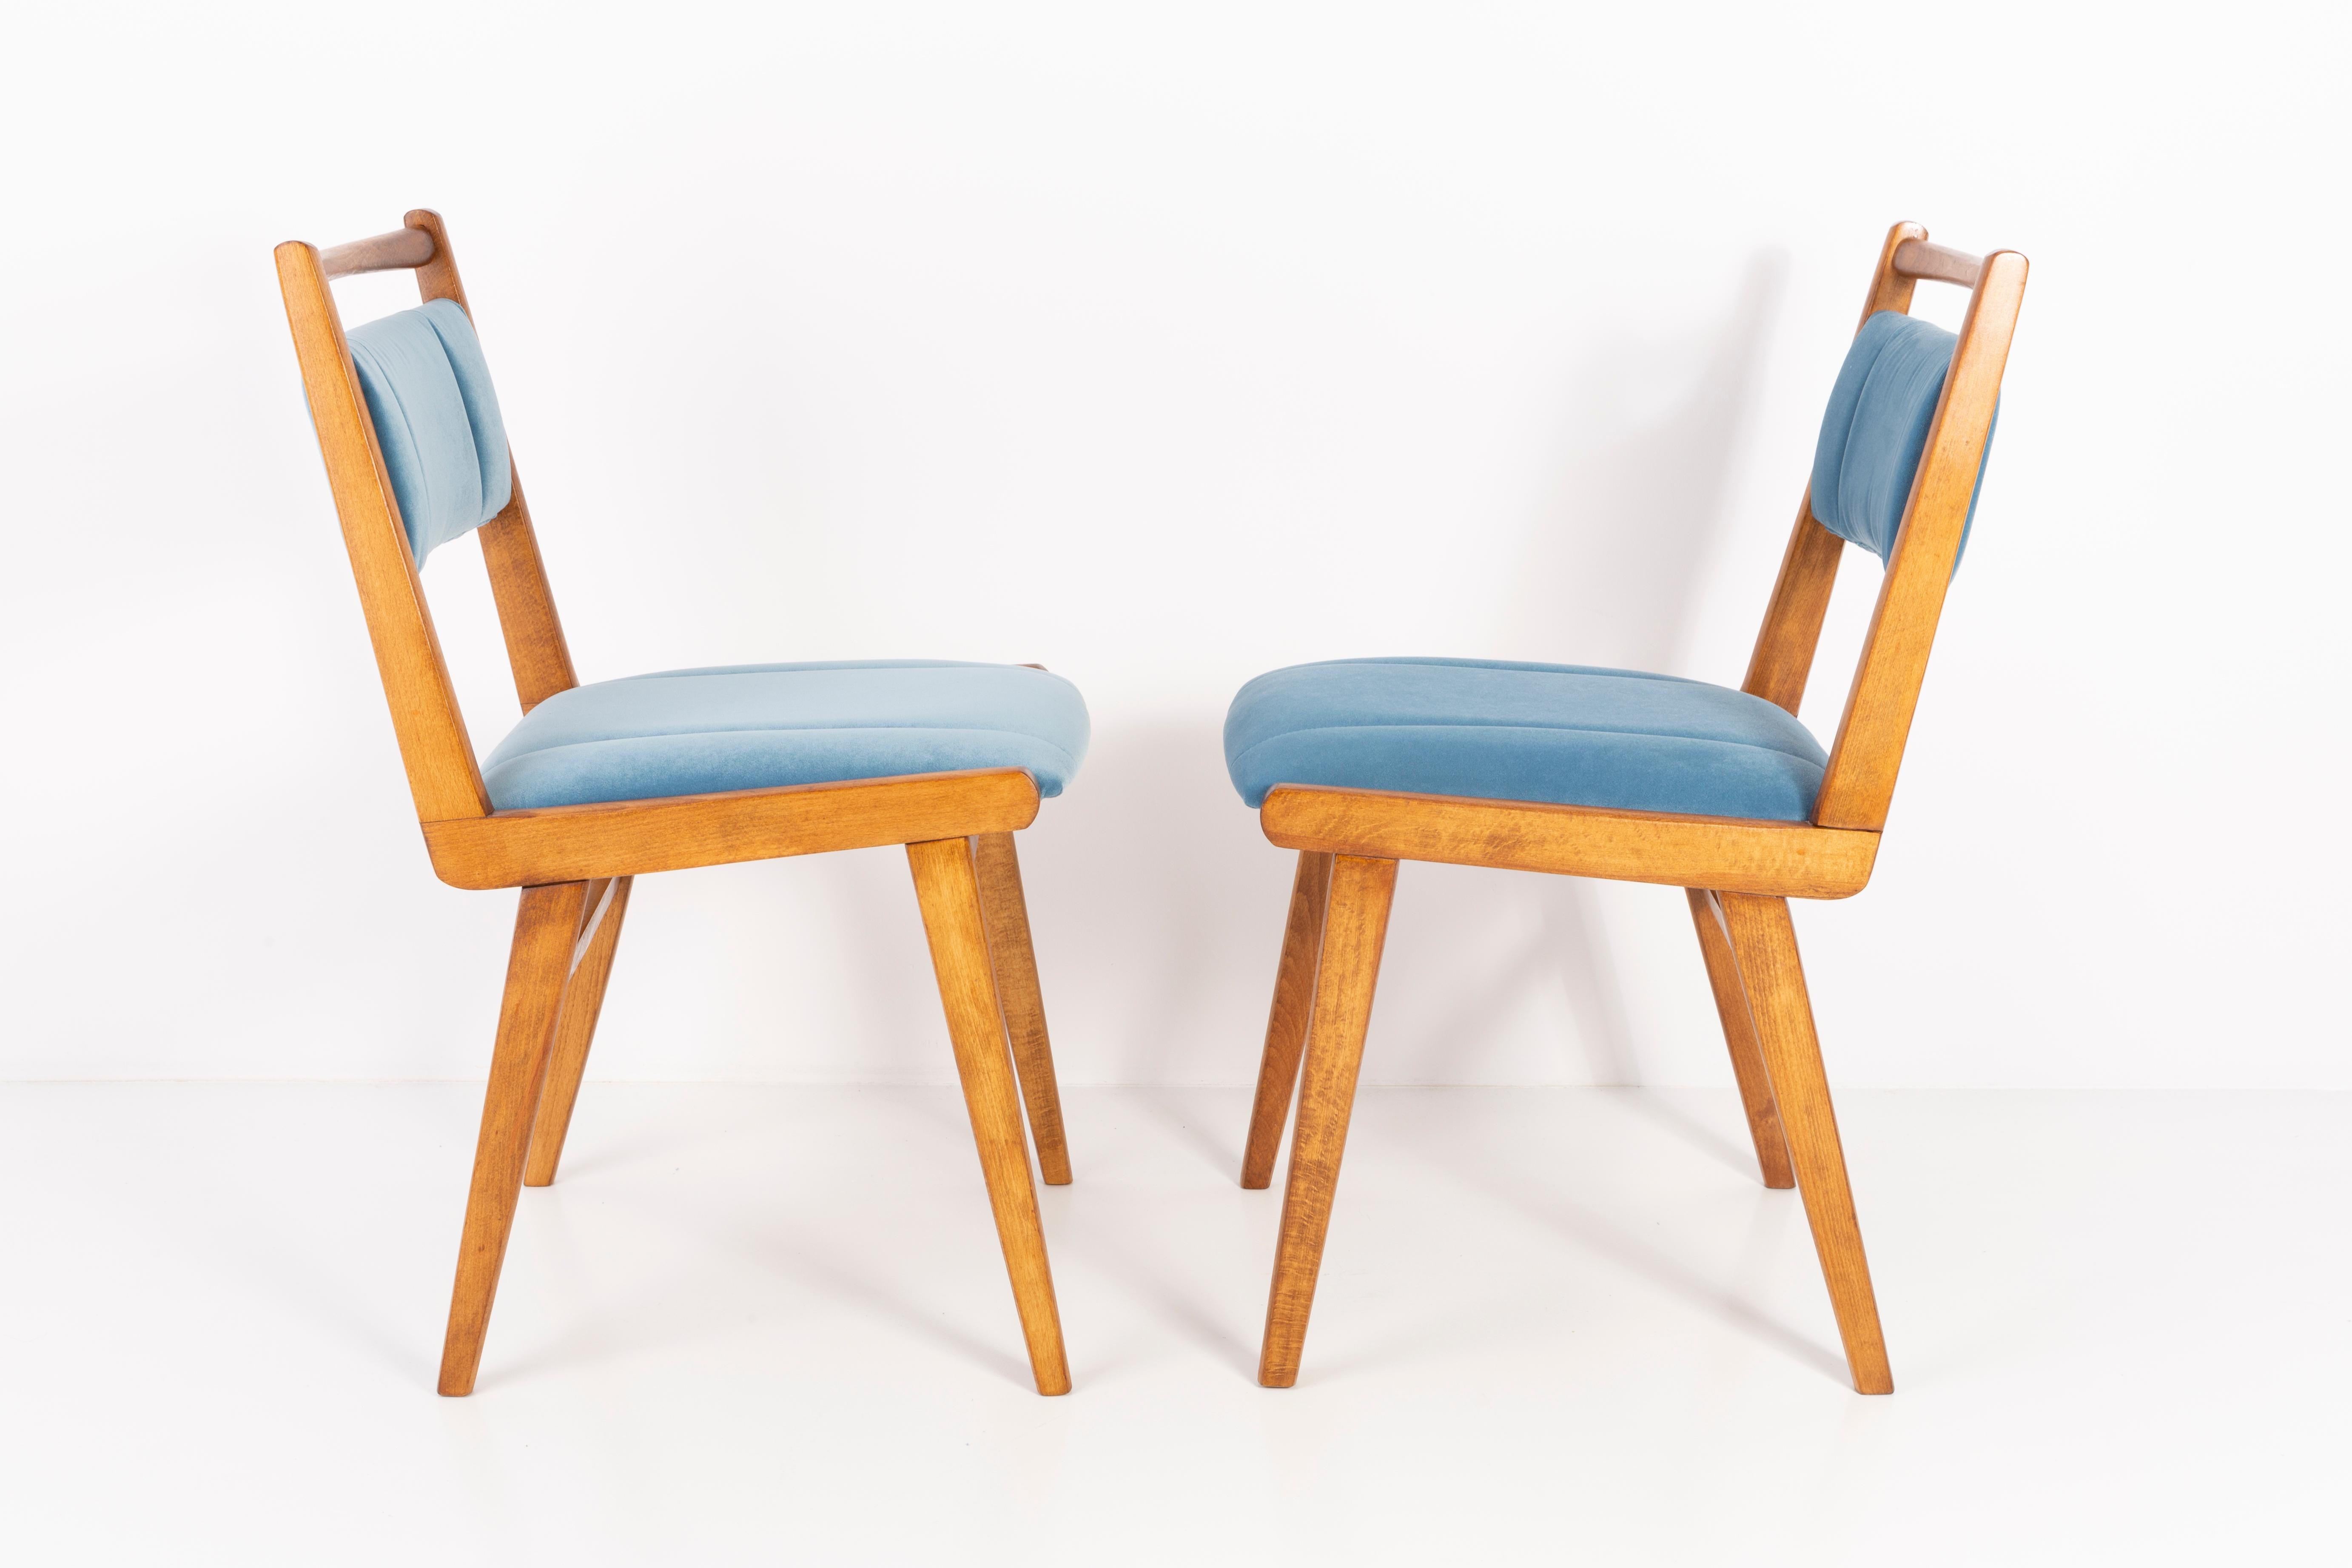 Chairs designed by Prof. Rajmund Halas. It is JAR type model. Made of beechwood. Chairs are after a complete upholstery renovation, the woodwork has been refreshed. Seat and back is dressed in a blue (number 31), durable and pleasant to the touch